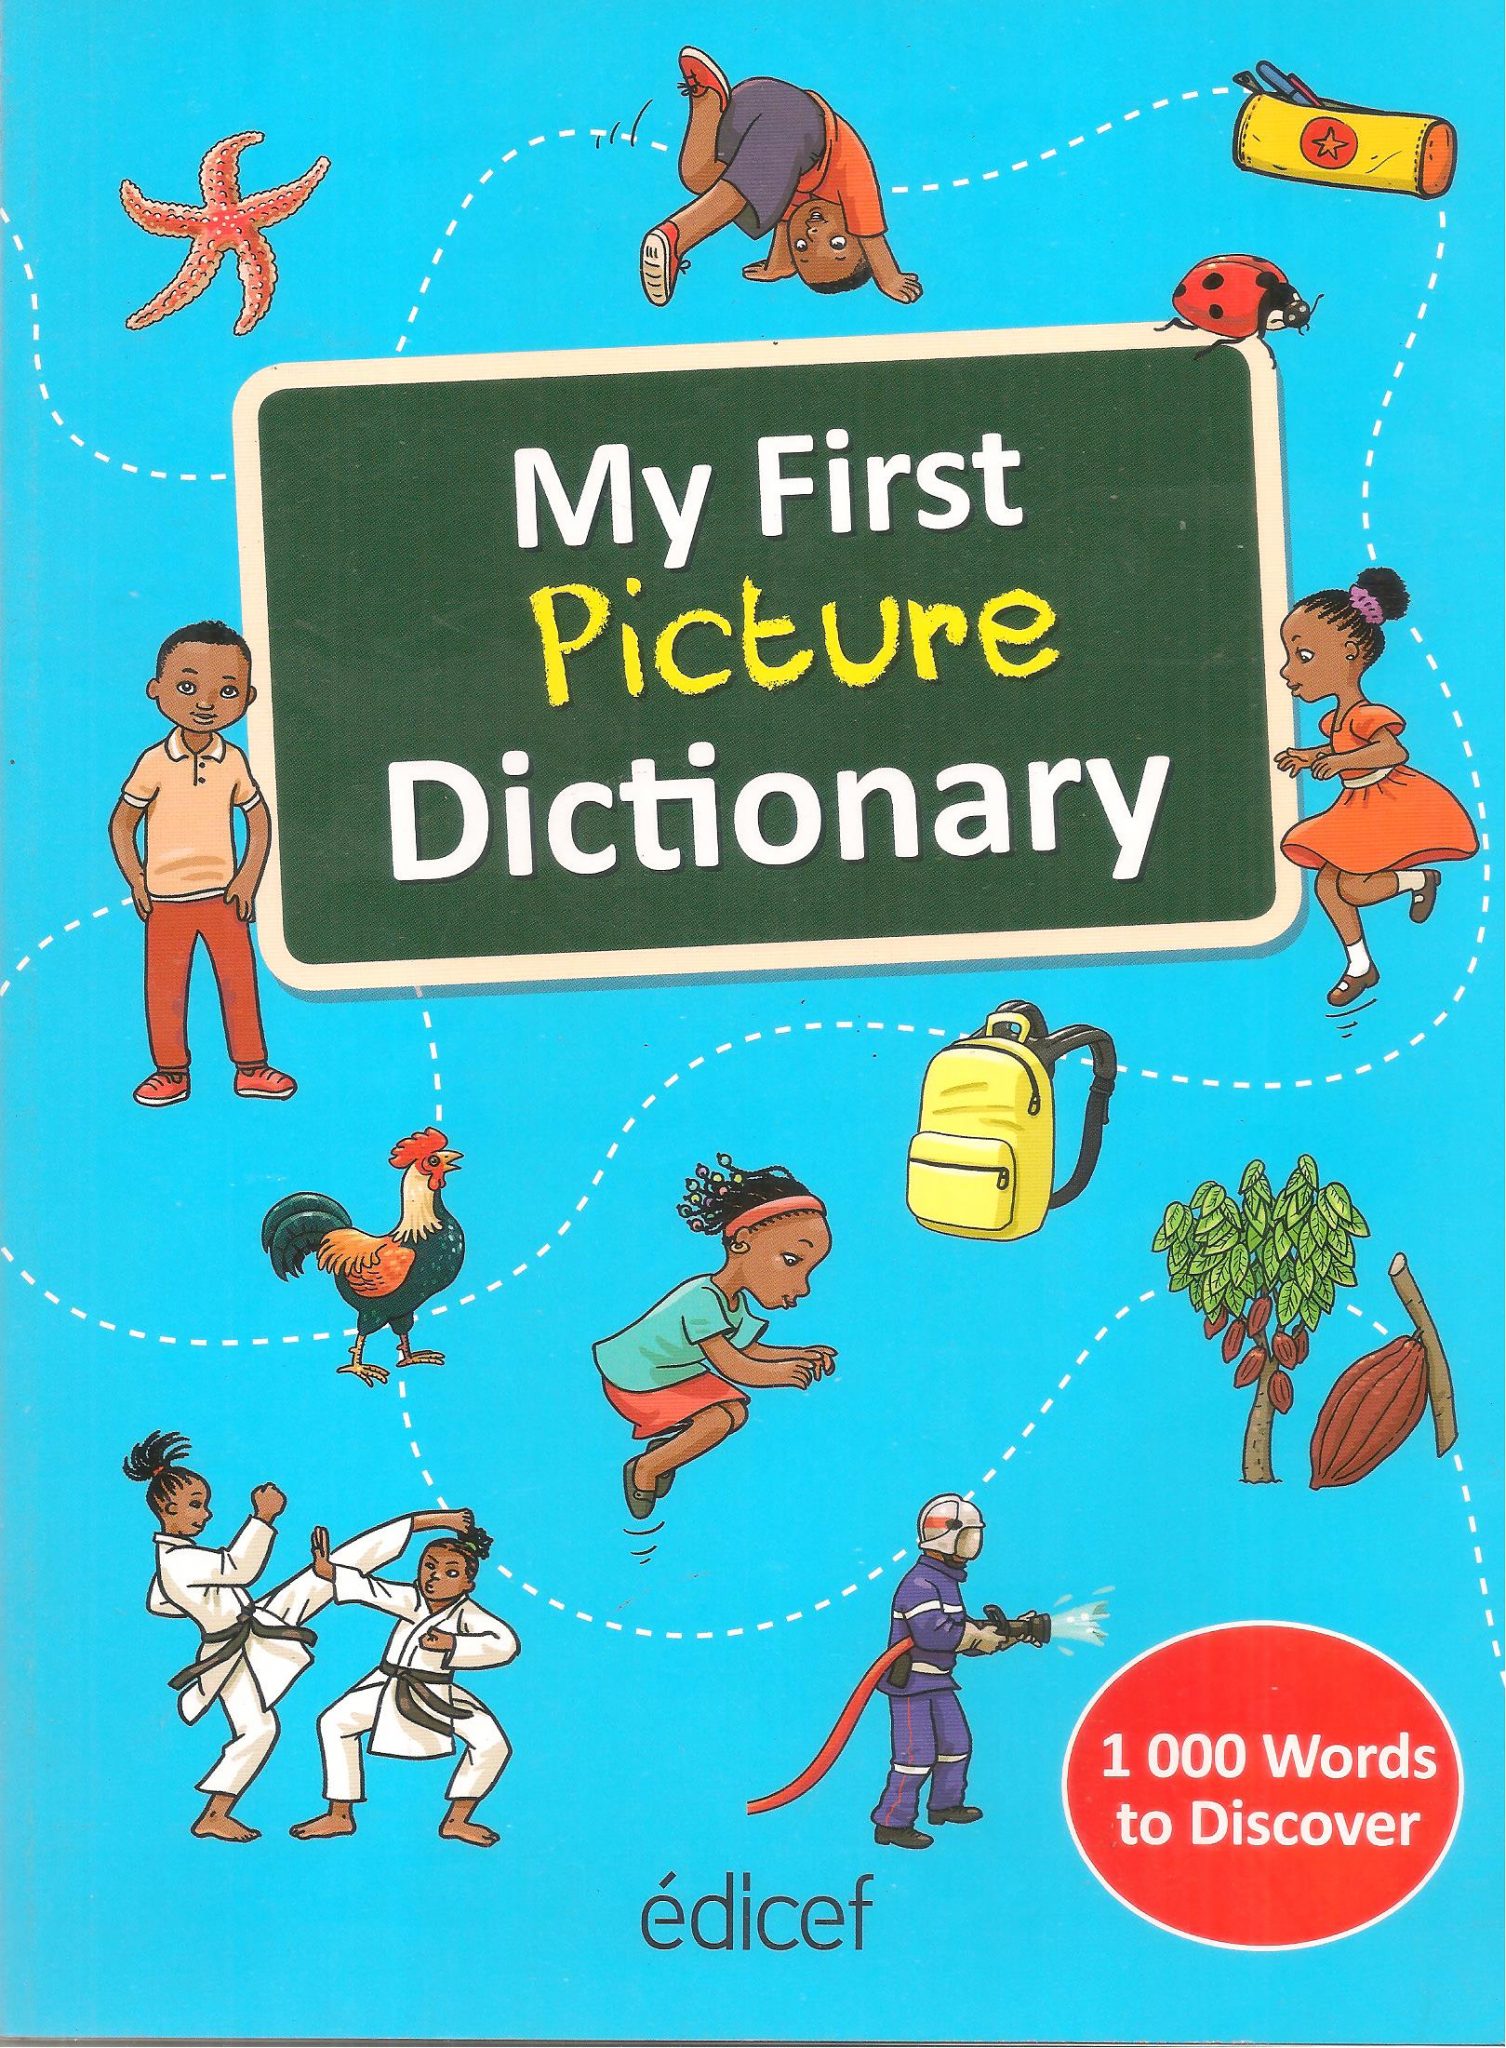 My First Picture Dictionary Bookconekt 6415